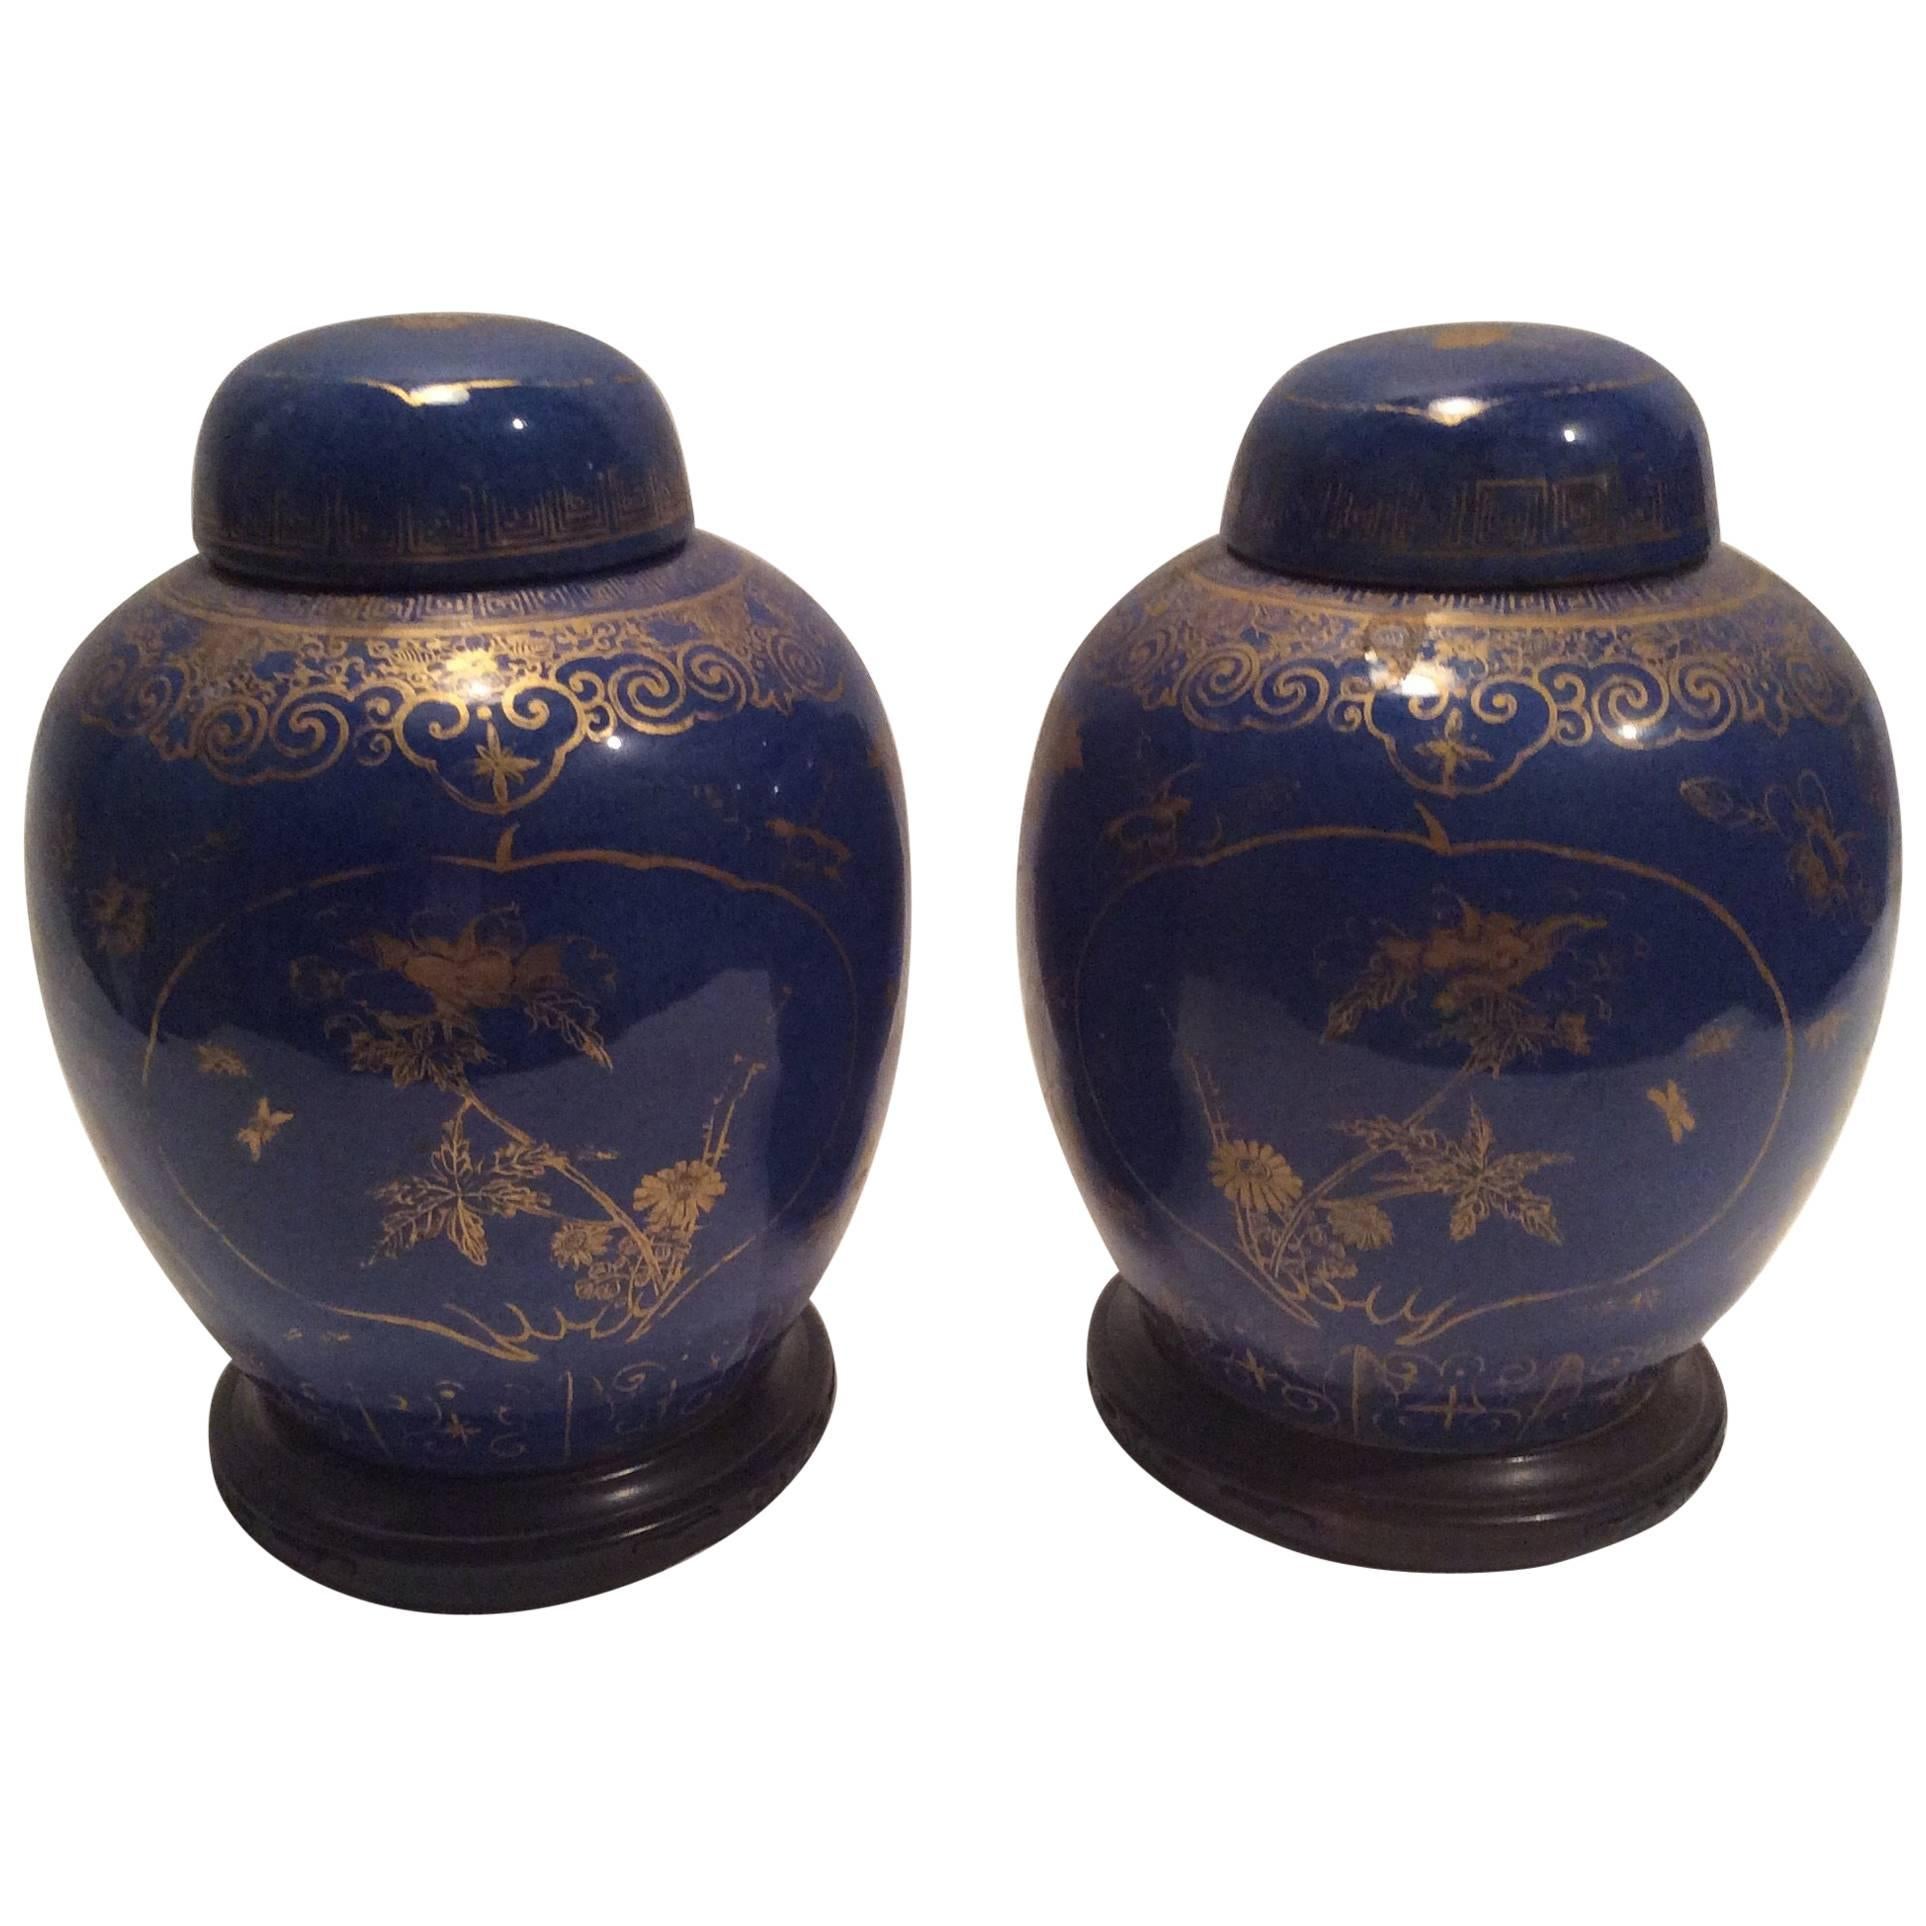 Pair of Qing Dynasty Ginger Jars